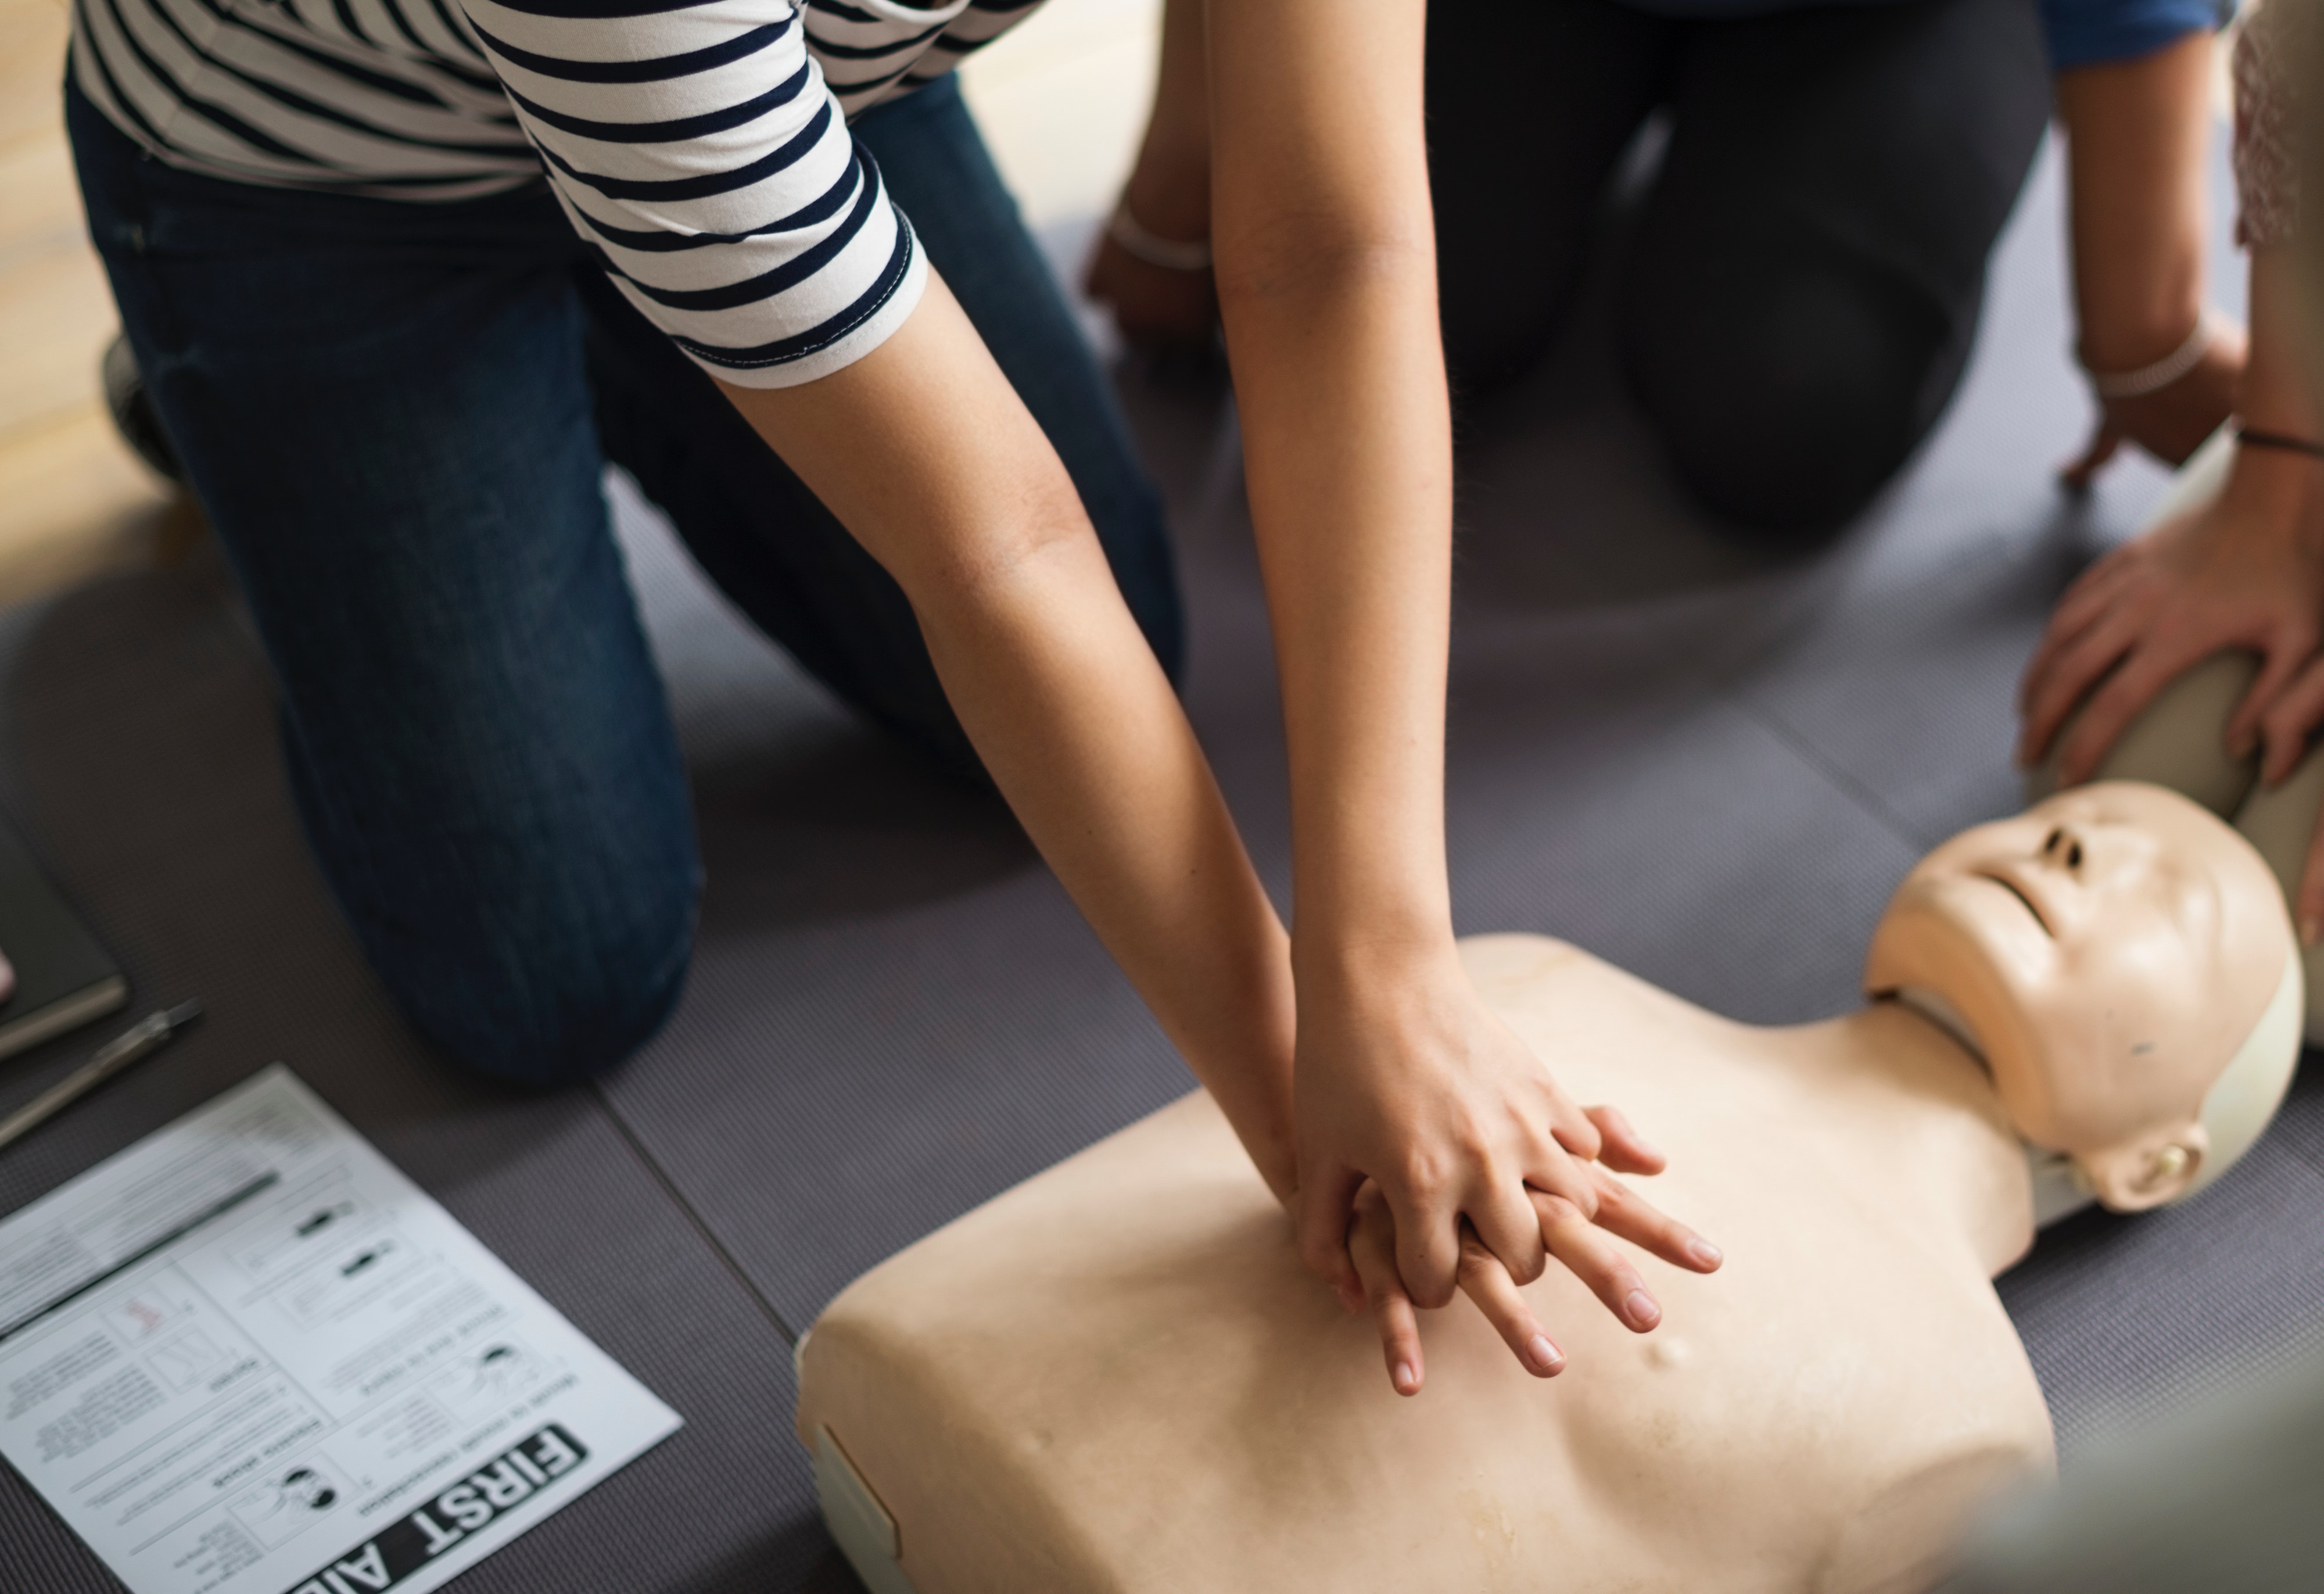 Basic CPR training as seen here can make a huge difference